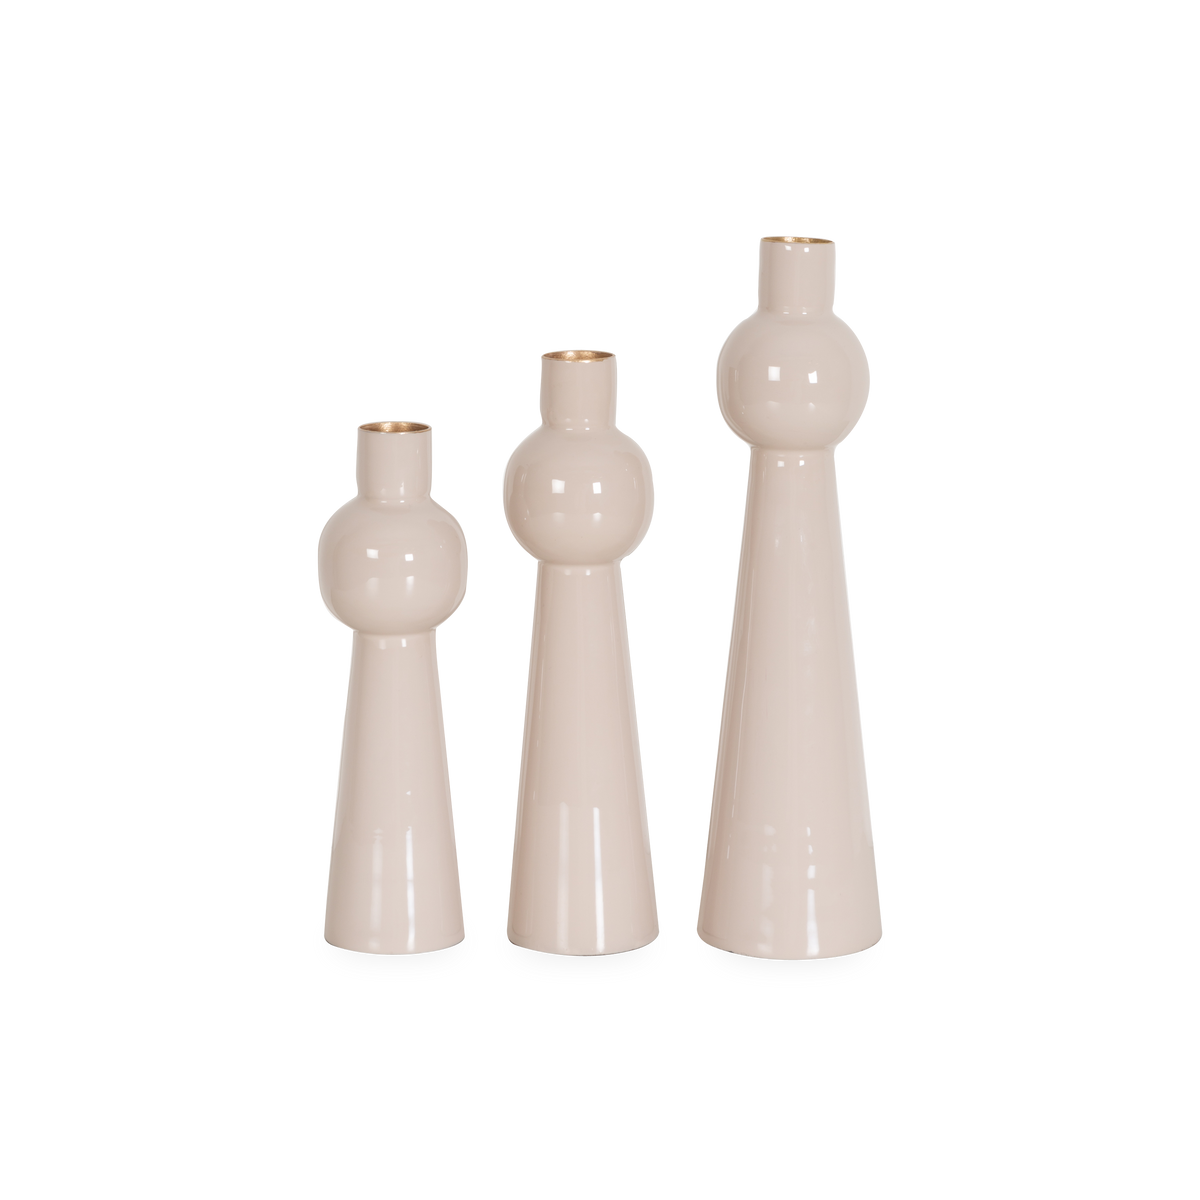 With a touch of contemporary design with traditional Scandinavian motifs, the Enamel Candle Holder features a tall, tapered silhouette that is perfect for any interior.